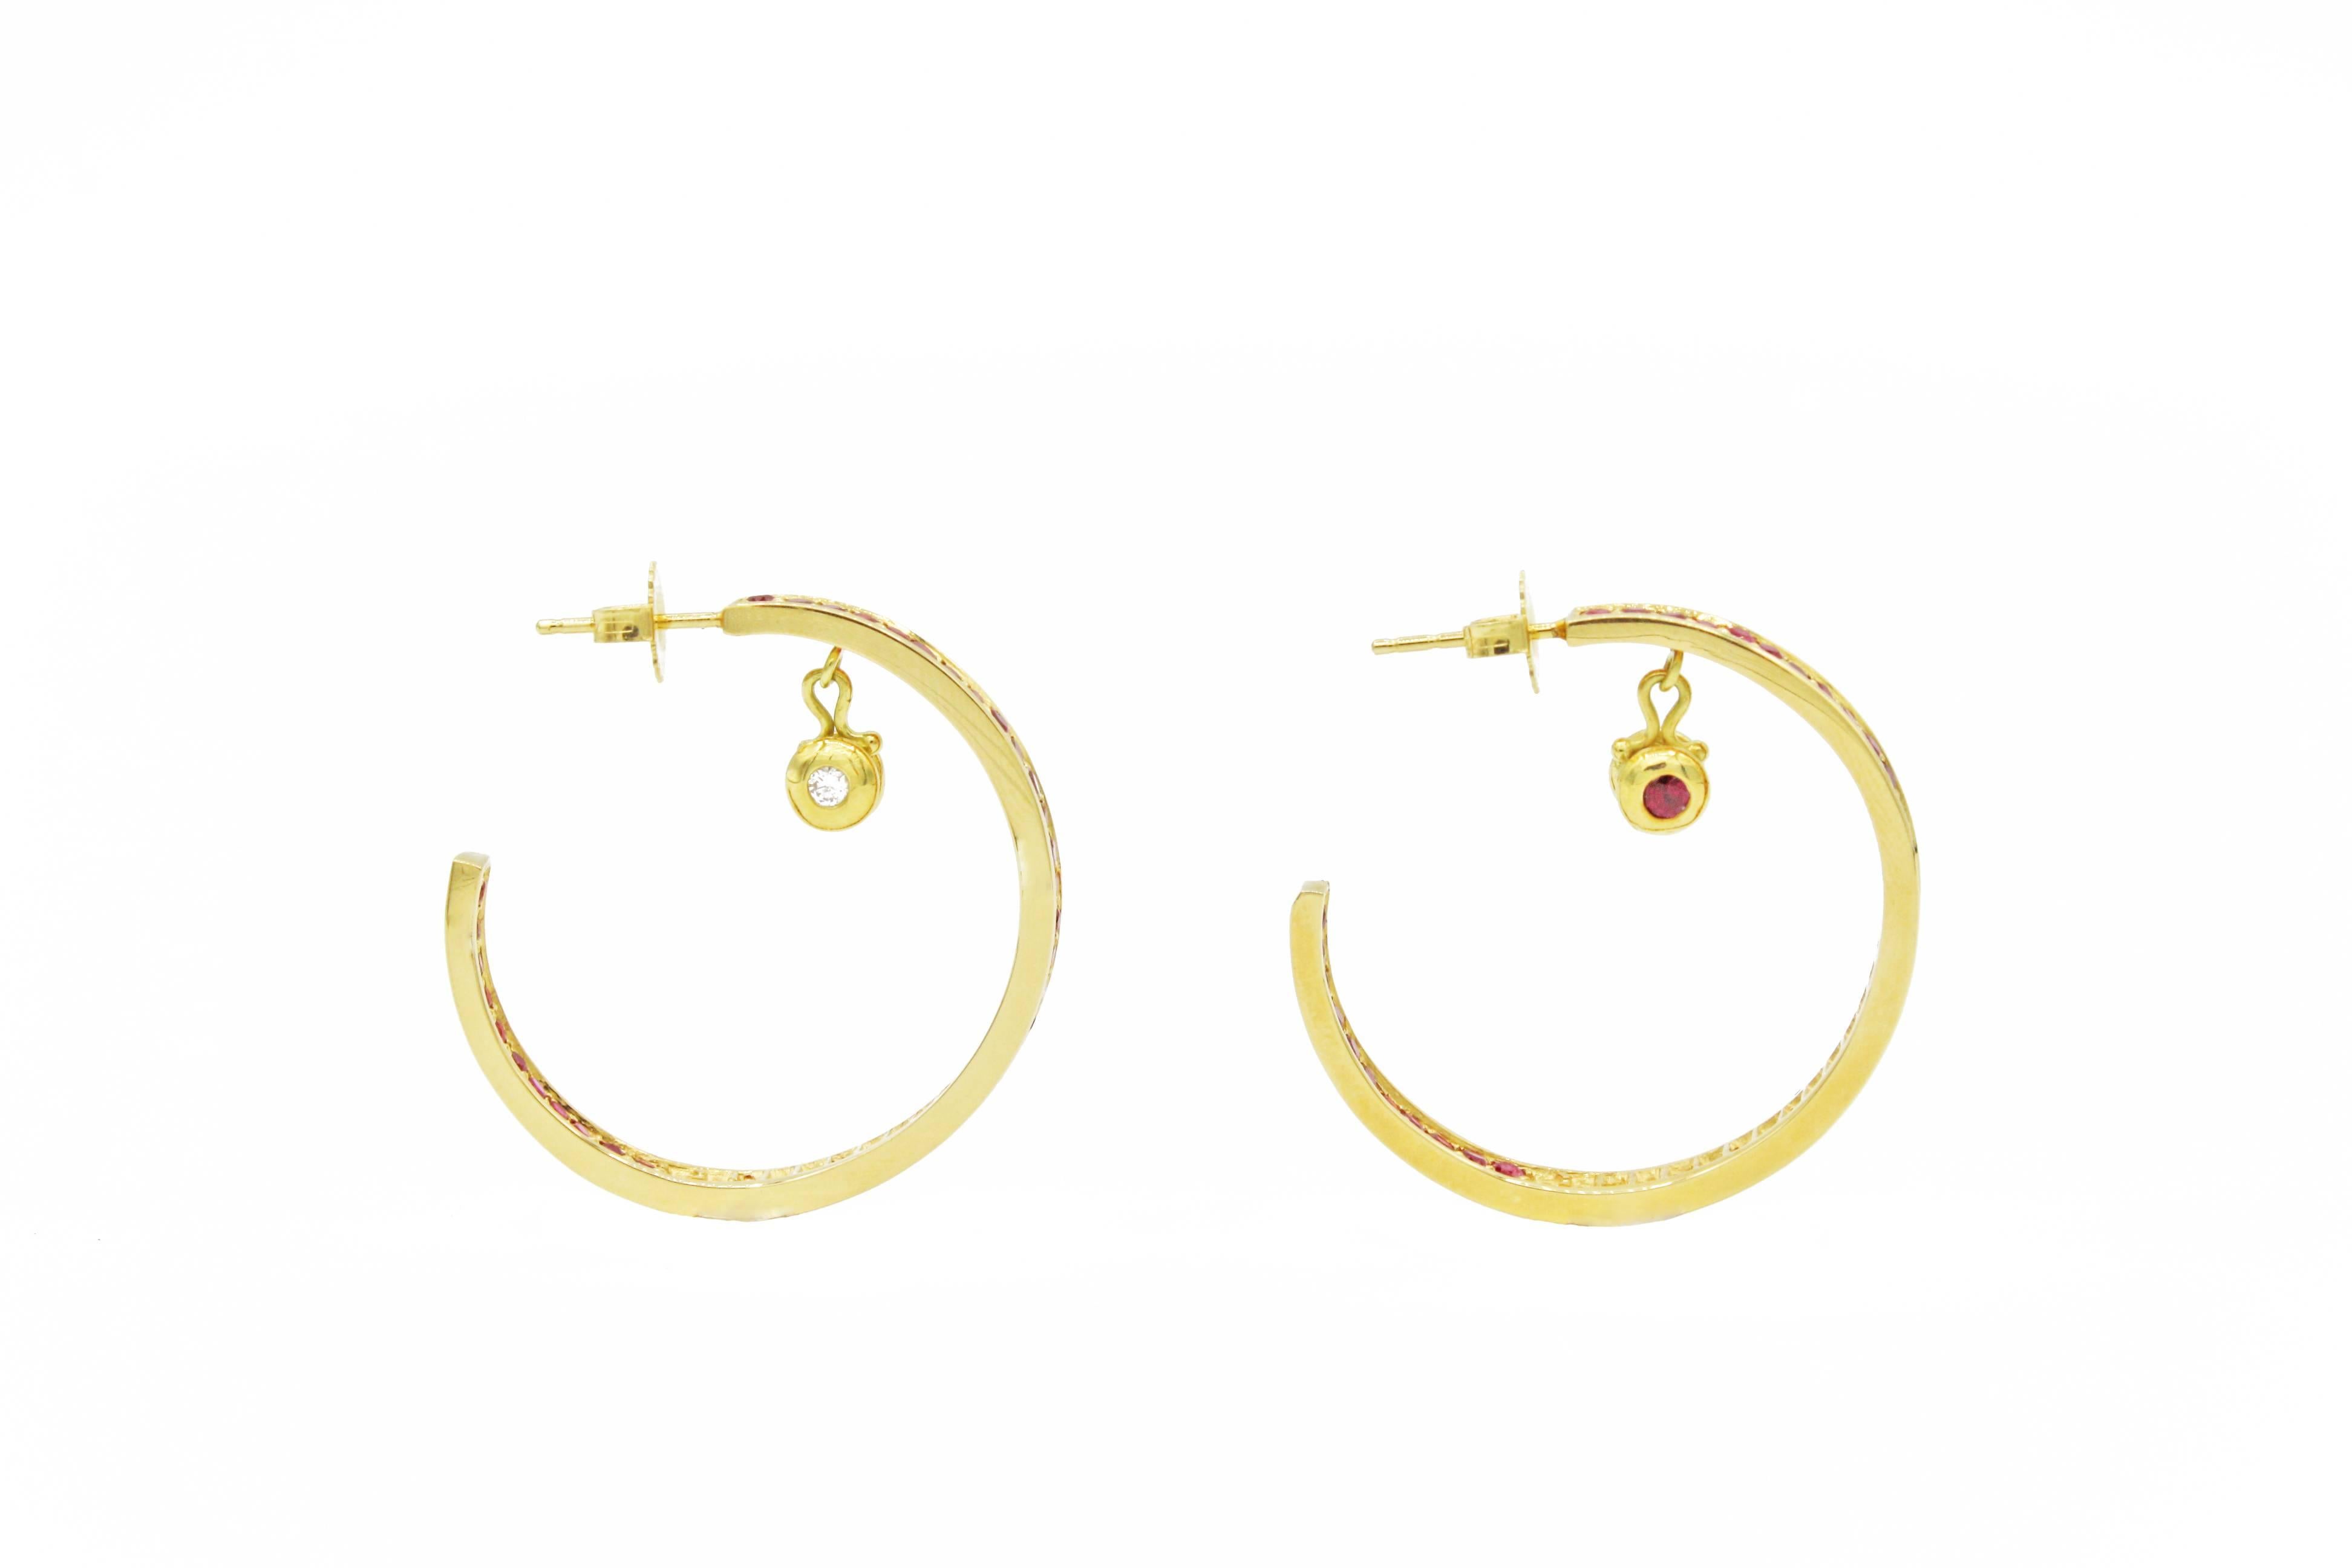 These unique 18kt gold hoop earrings have 3.50 cts rubies set along the outside and a portion of the inside of the hoops.  The gold droplets within the hoops are also set with 0.17 cts rubies on one side and 0.15 cts diamonds on the other side,